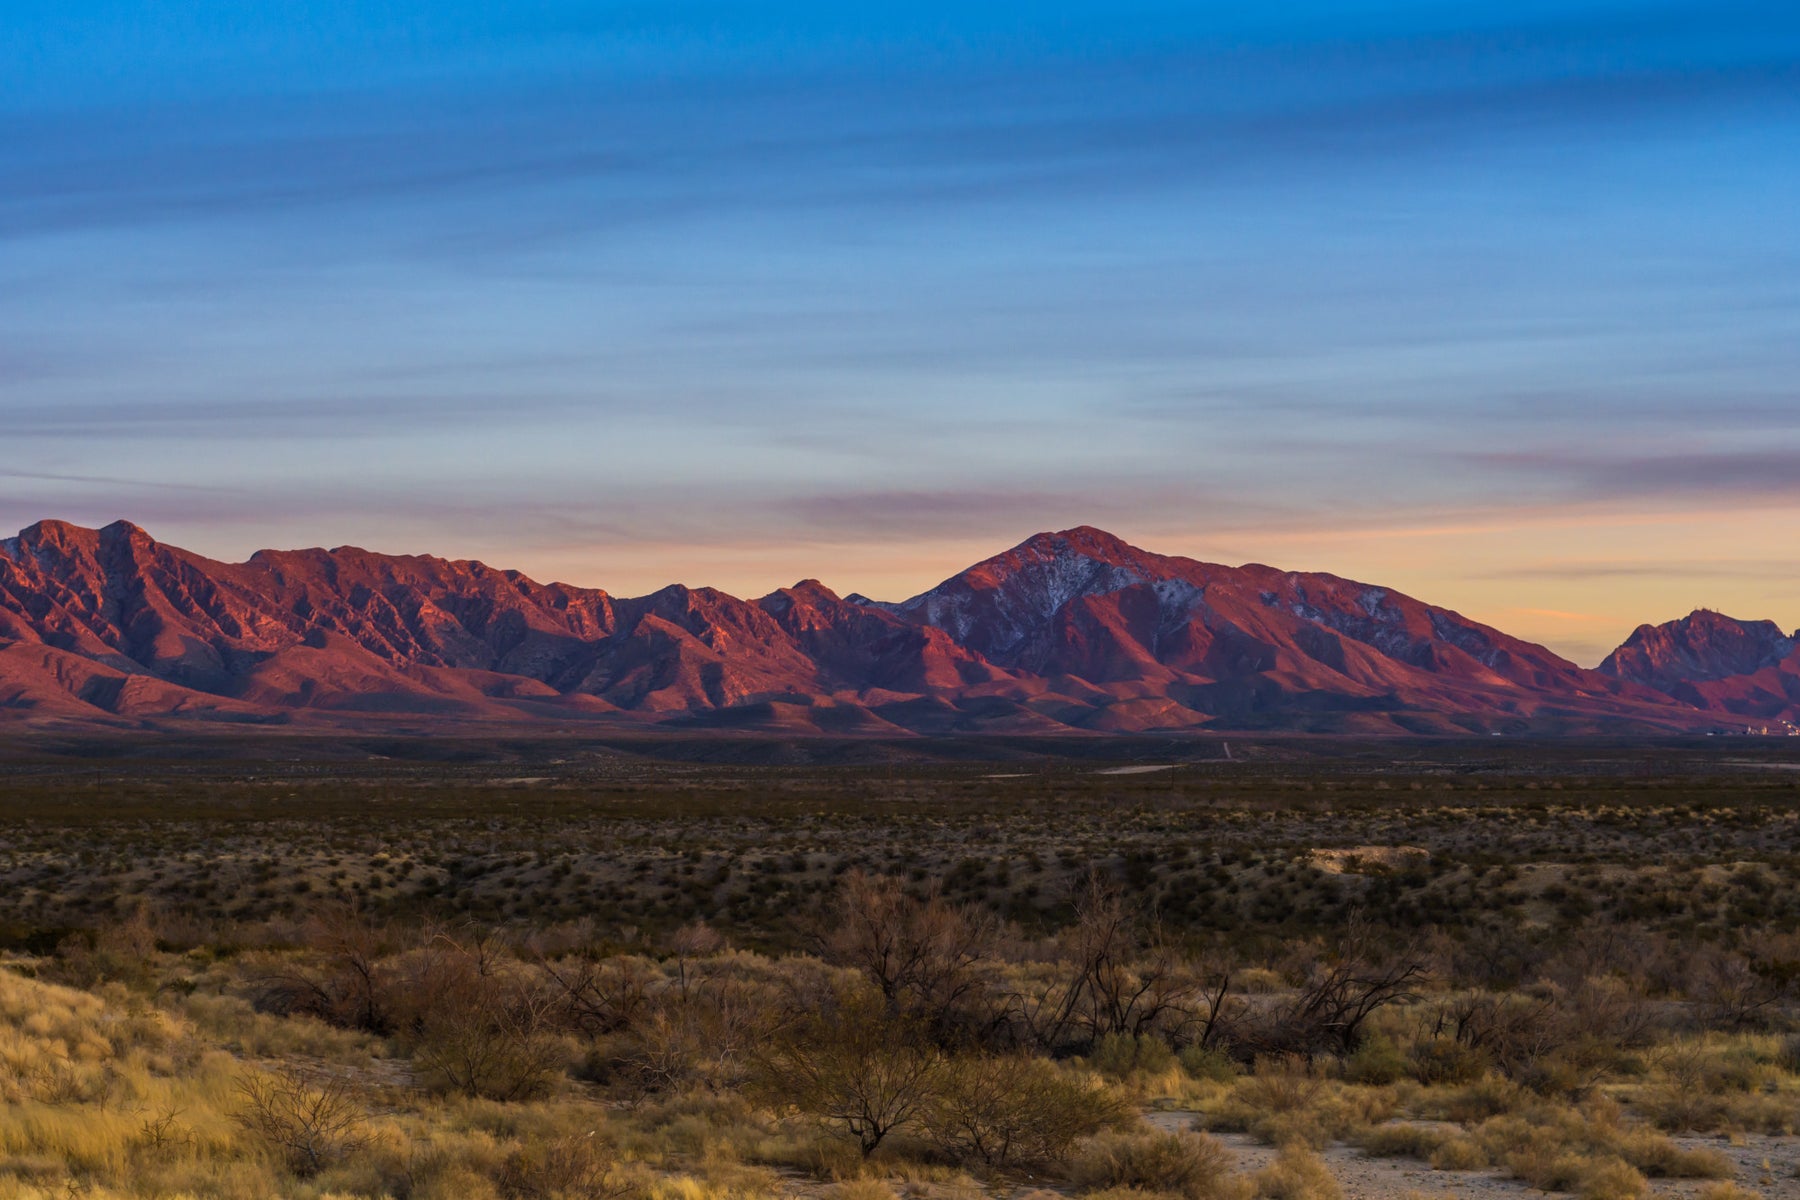 a sunset falls on a desert landscape with mountains in the distance 